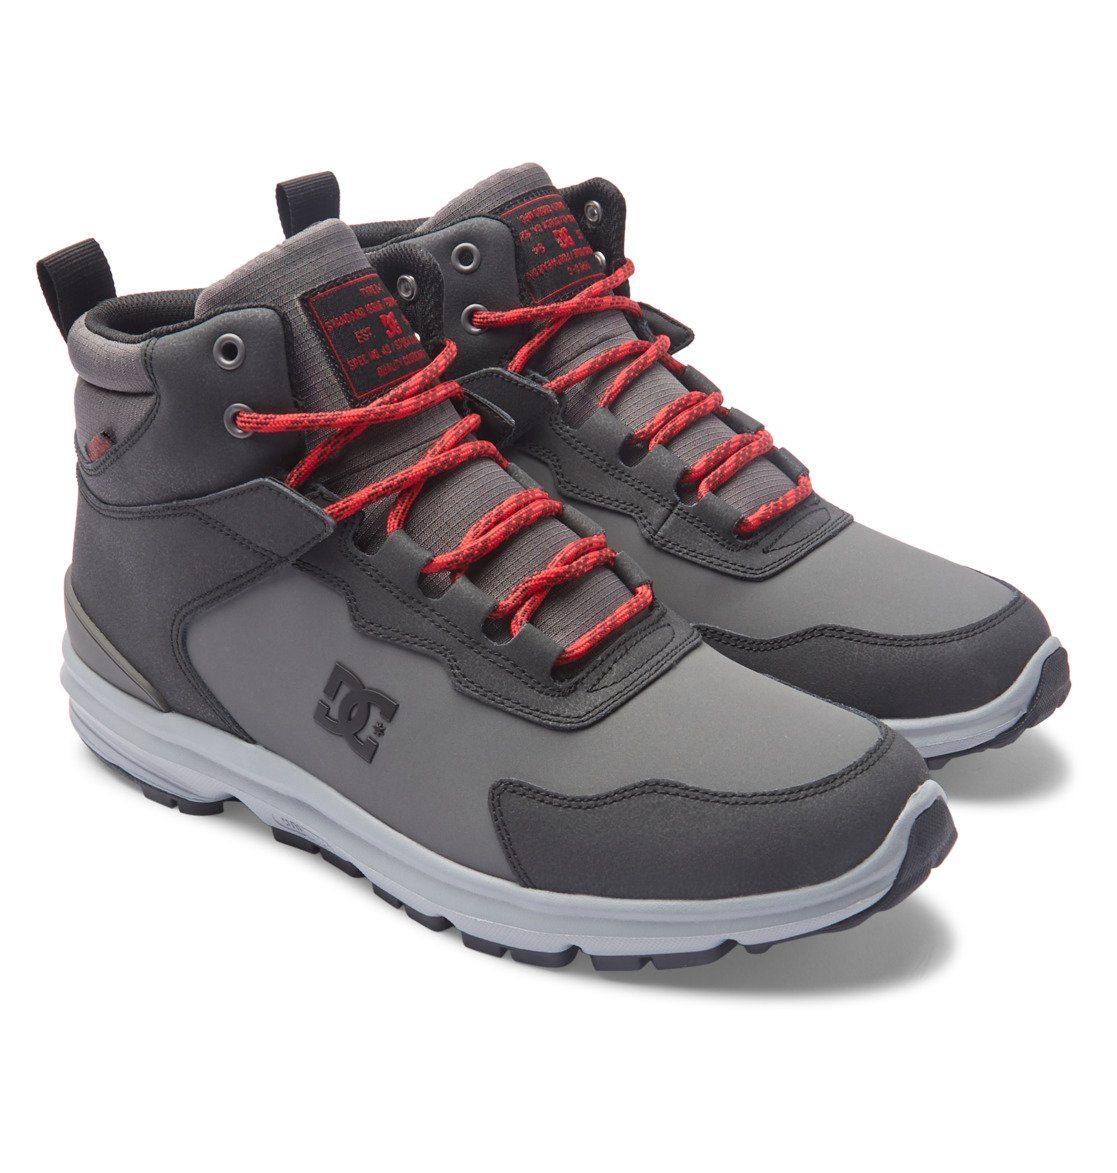 DC Shoes Mutiny Stiefel Grey/Black/Red